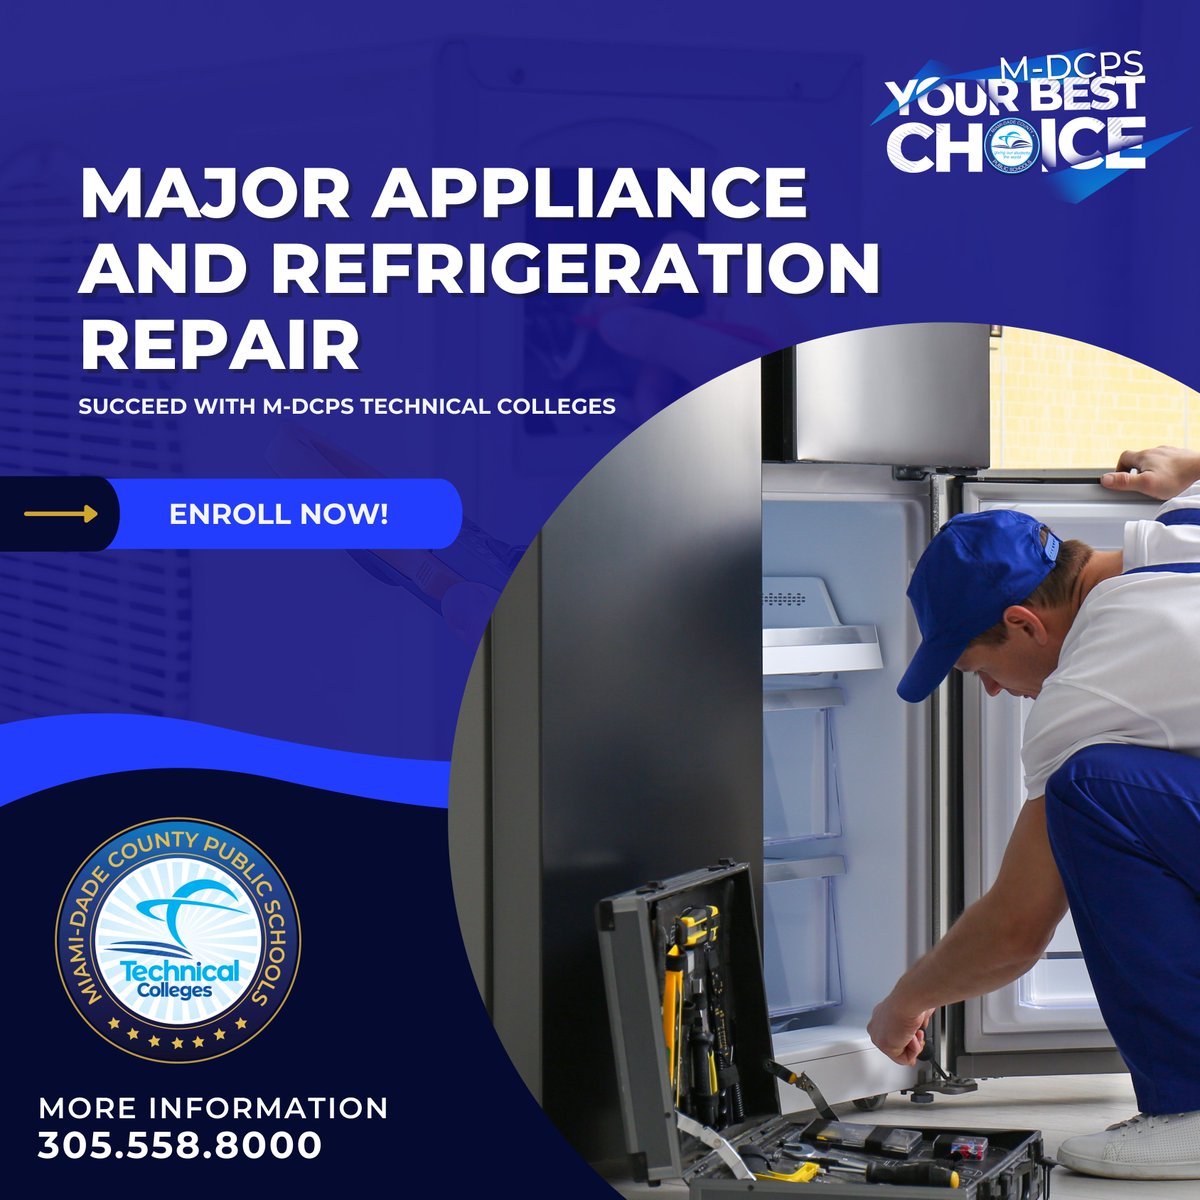 Exciting Opportunity Alert! Are you passionate about fixing things? Our Major Appliance Repair Program is here to turn your passion into a rewarding career! 🌟 Enroll now at @MlecTech or @RMECTC and graduate debt free! 🎓 #YourBestChoiceMDCPS